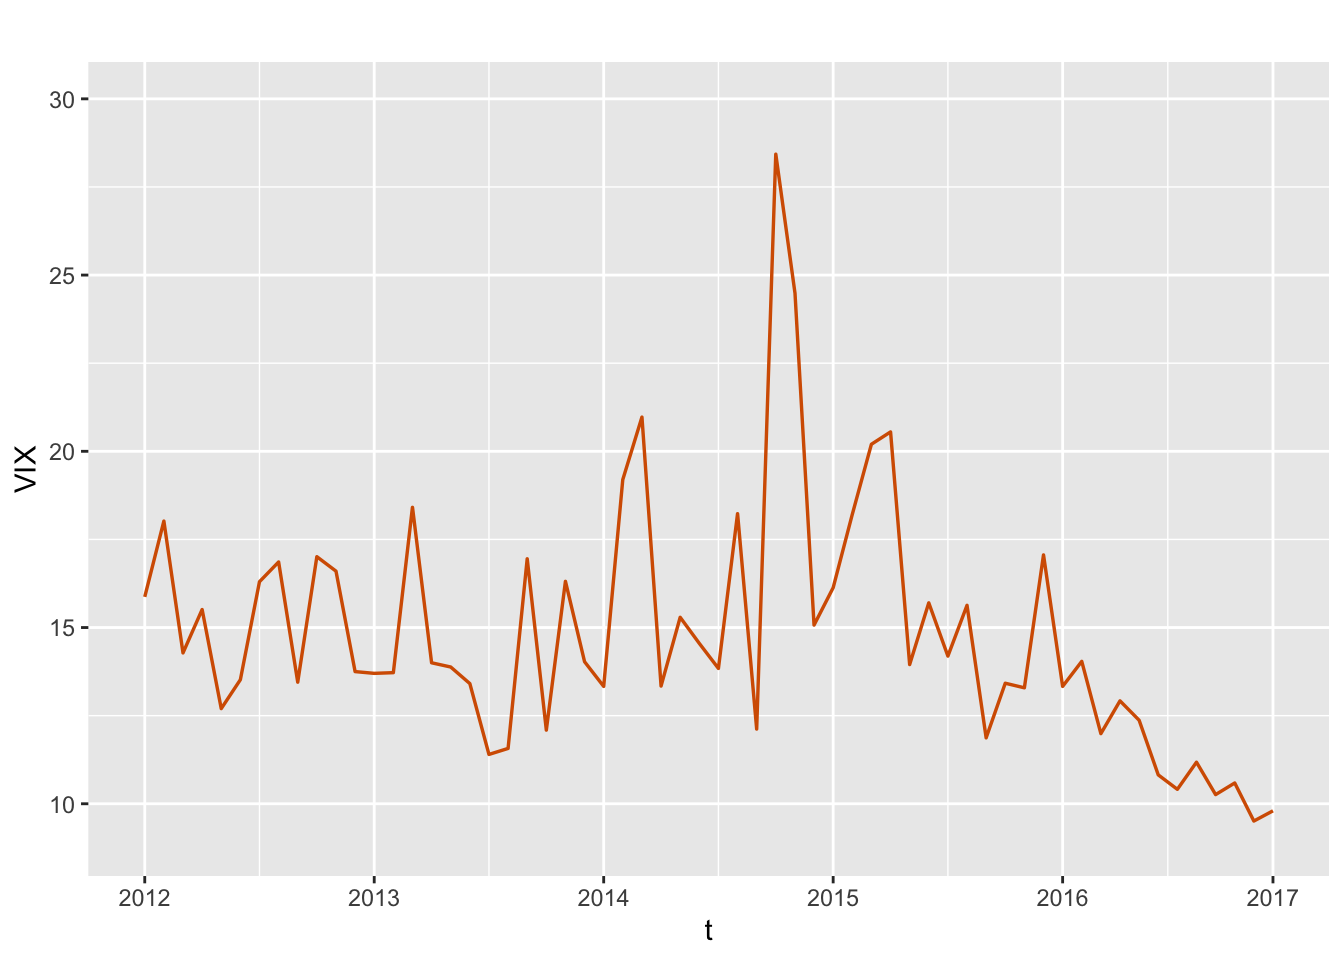 Monthly time series of VIX. The x-axis labels show the years for the data series.